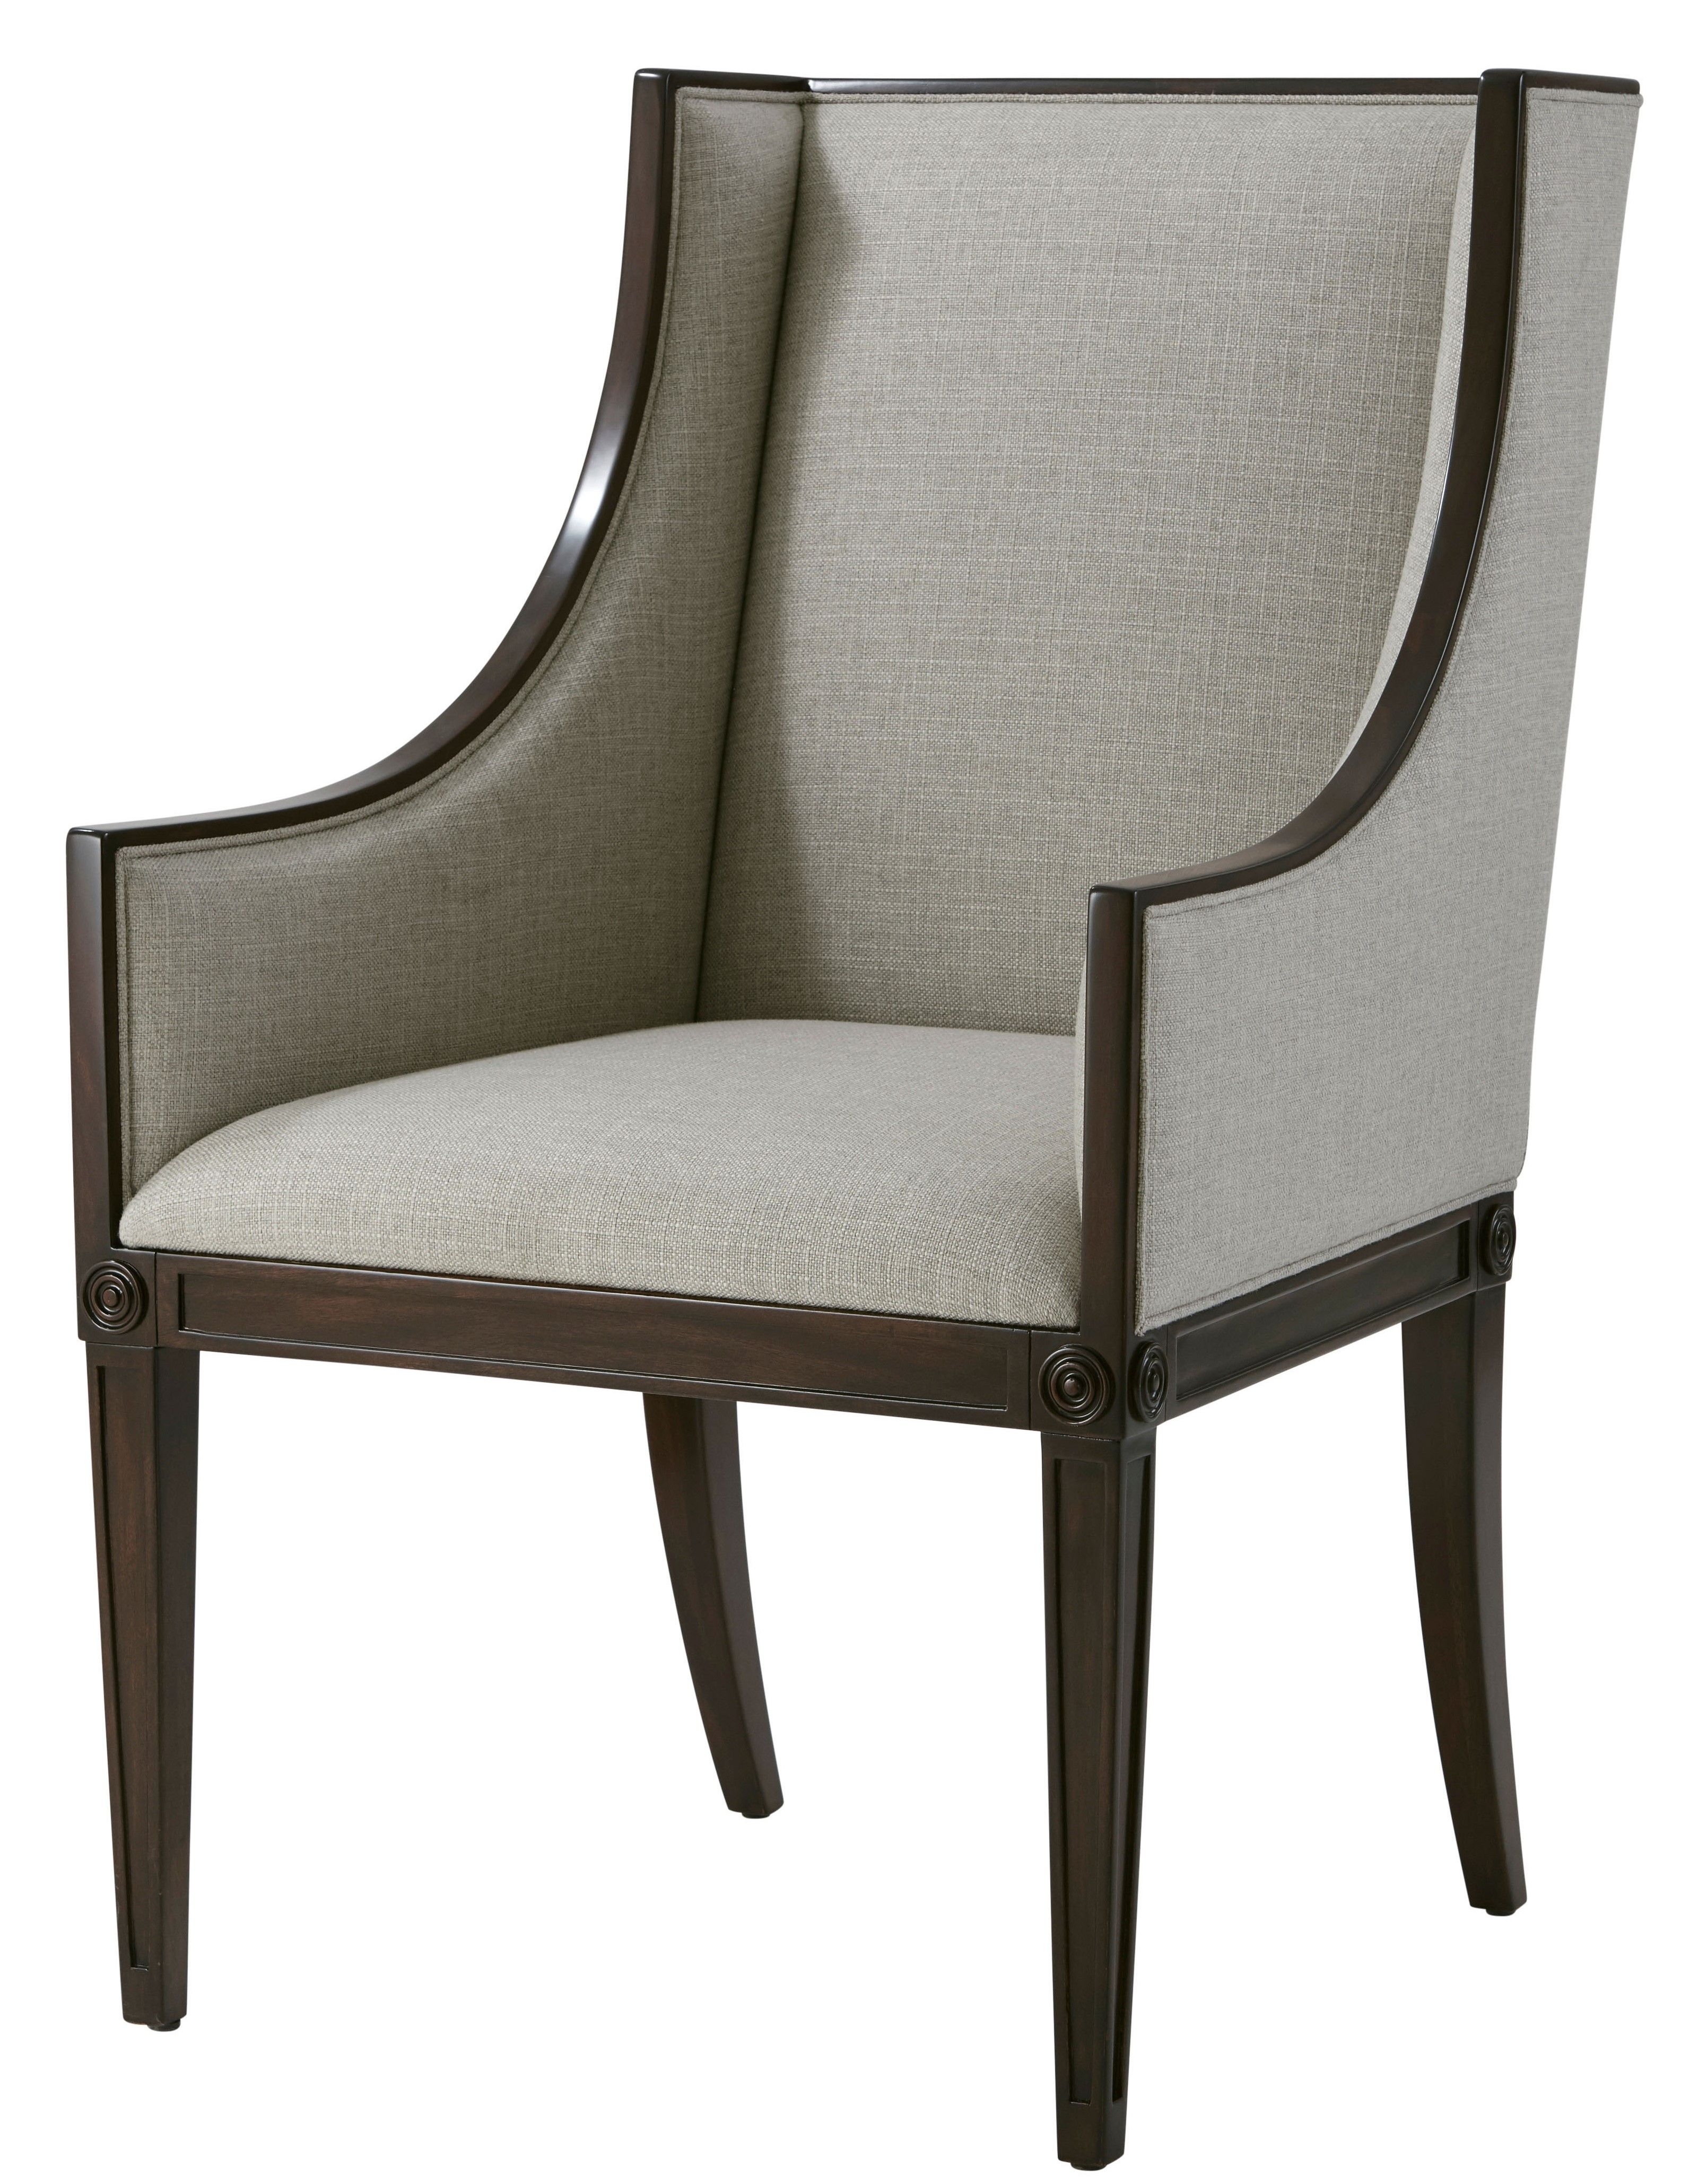 Ebonized mahogany armchair with winged back, drop-in seat, and square tapered legs